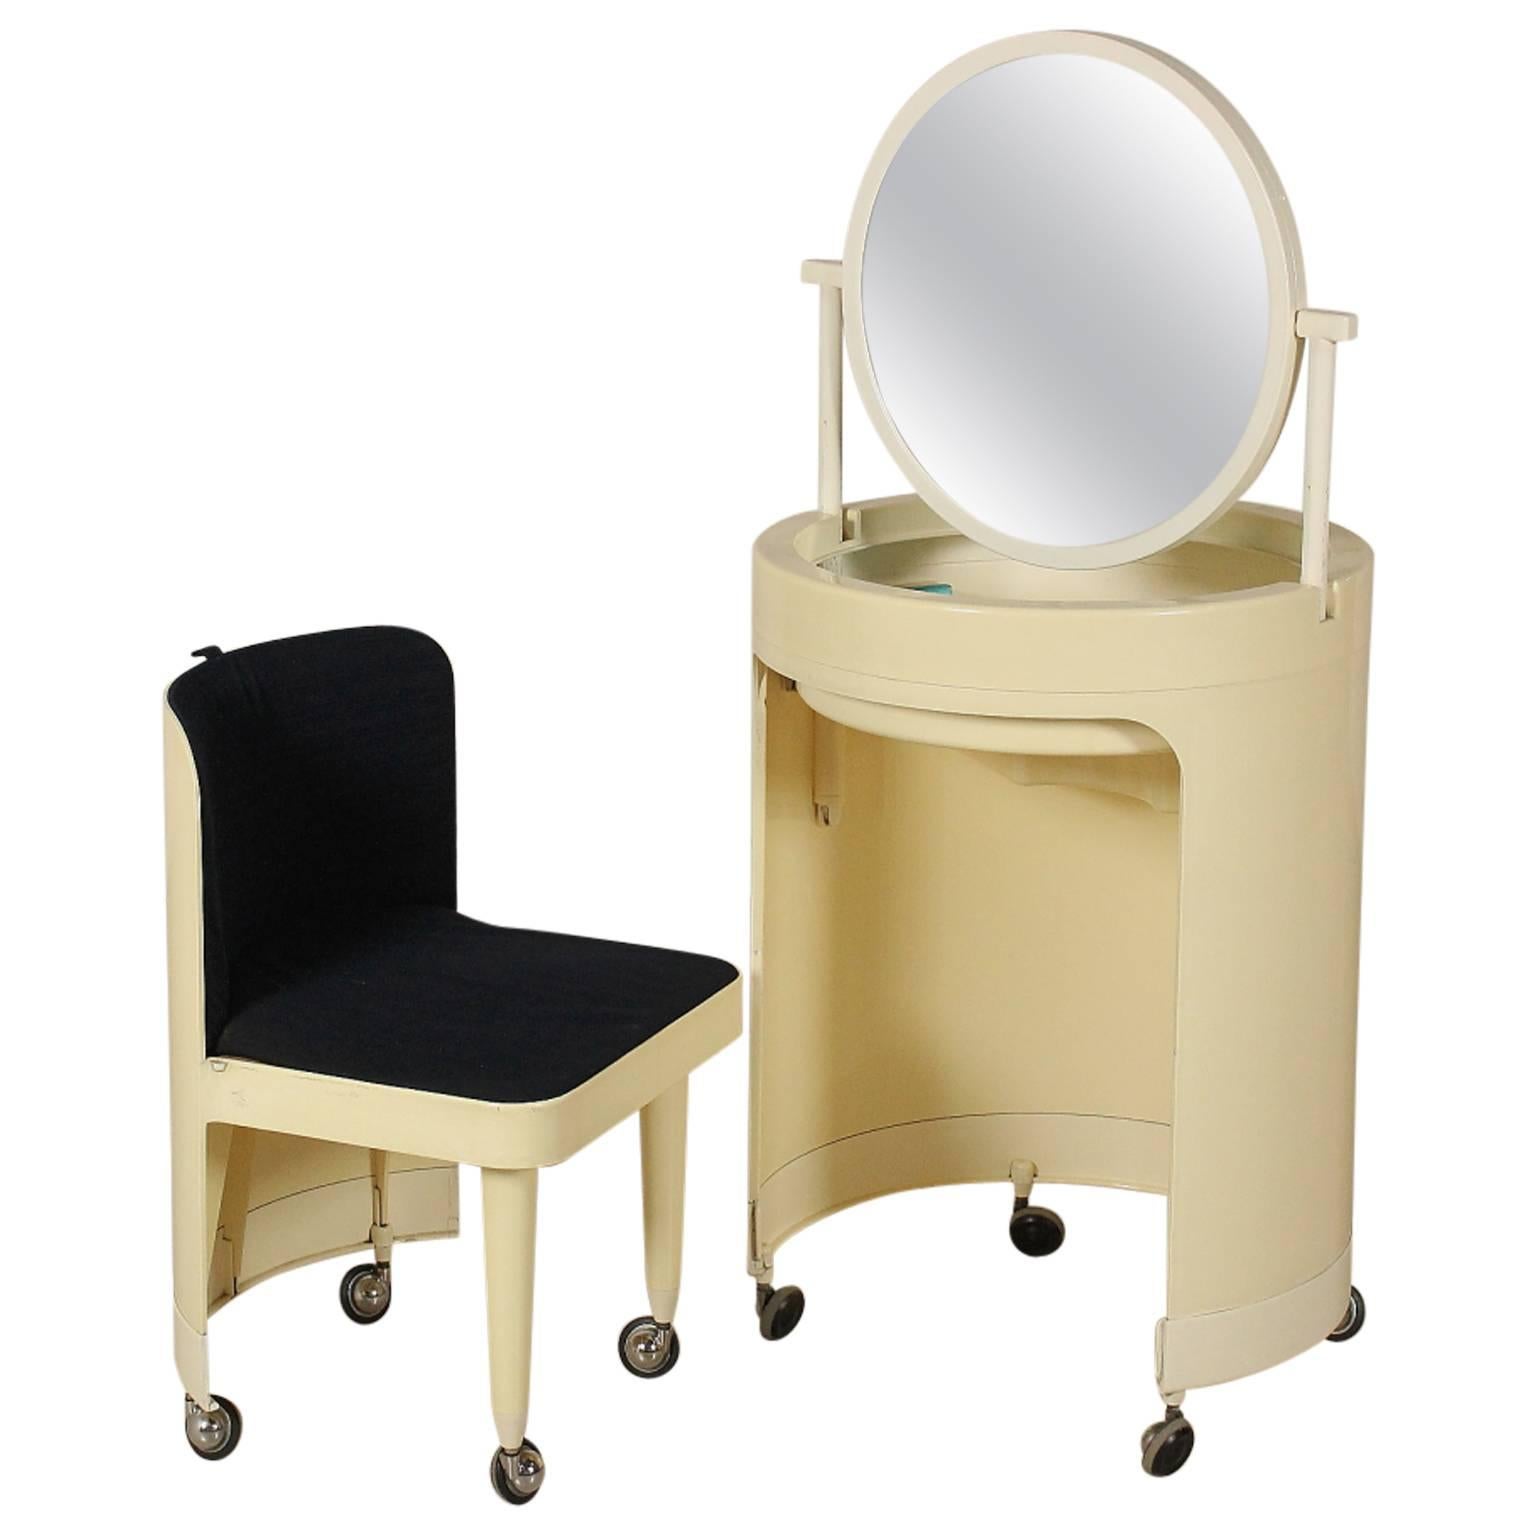 Plastic Dressing Table with Mirror Manufactured in Italy, 1970s